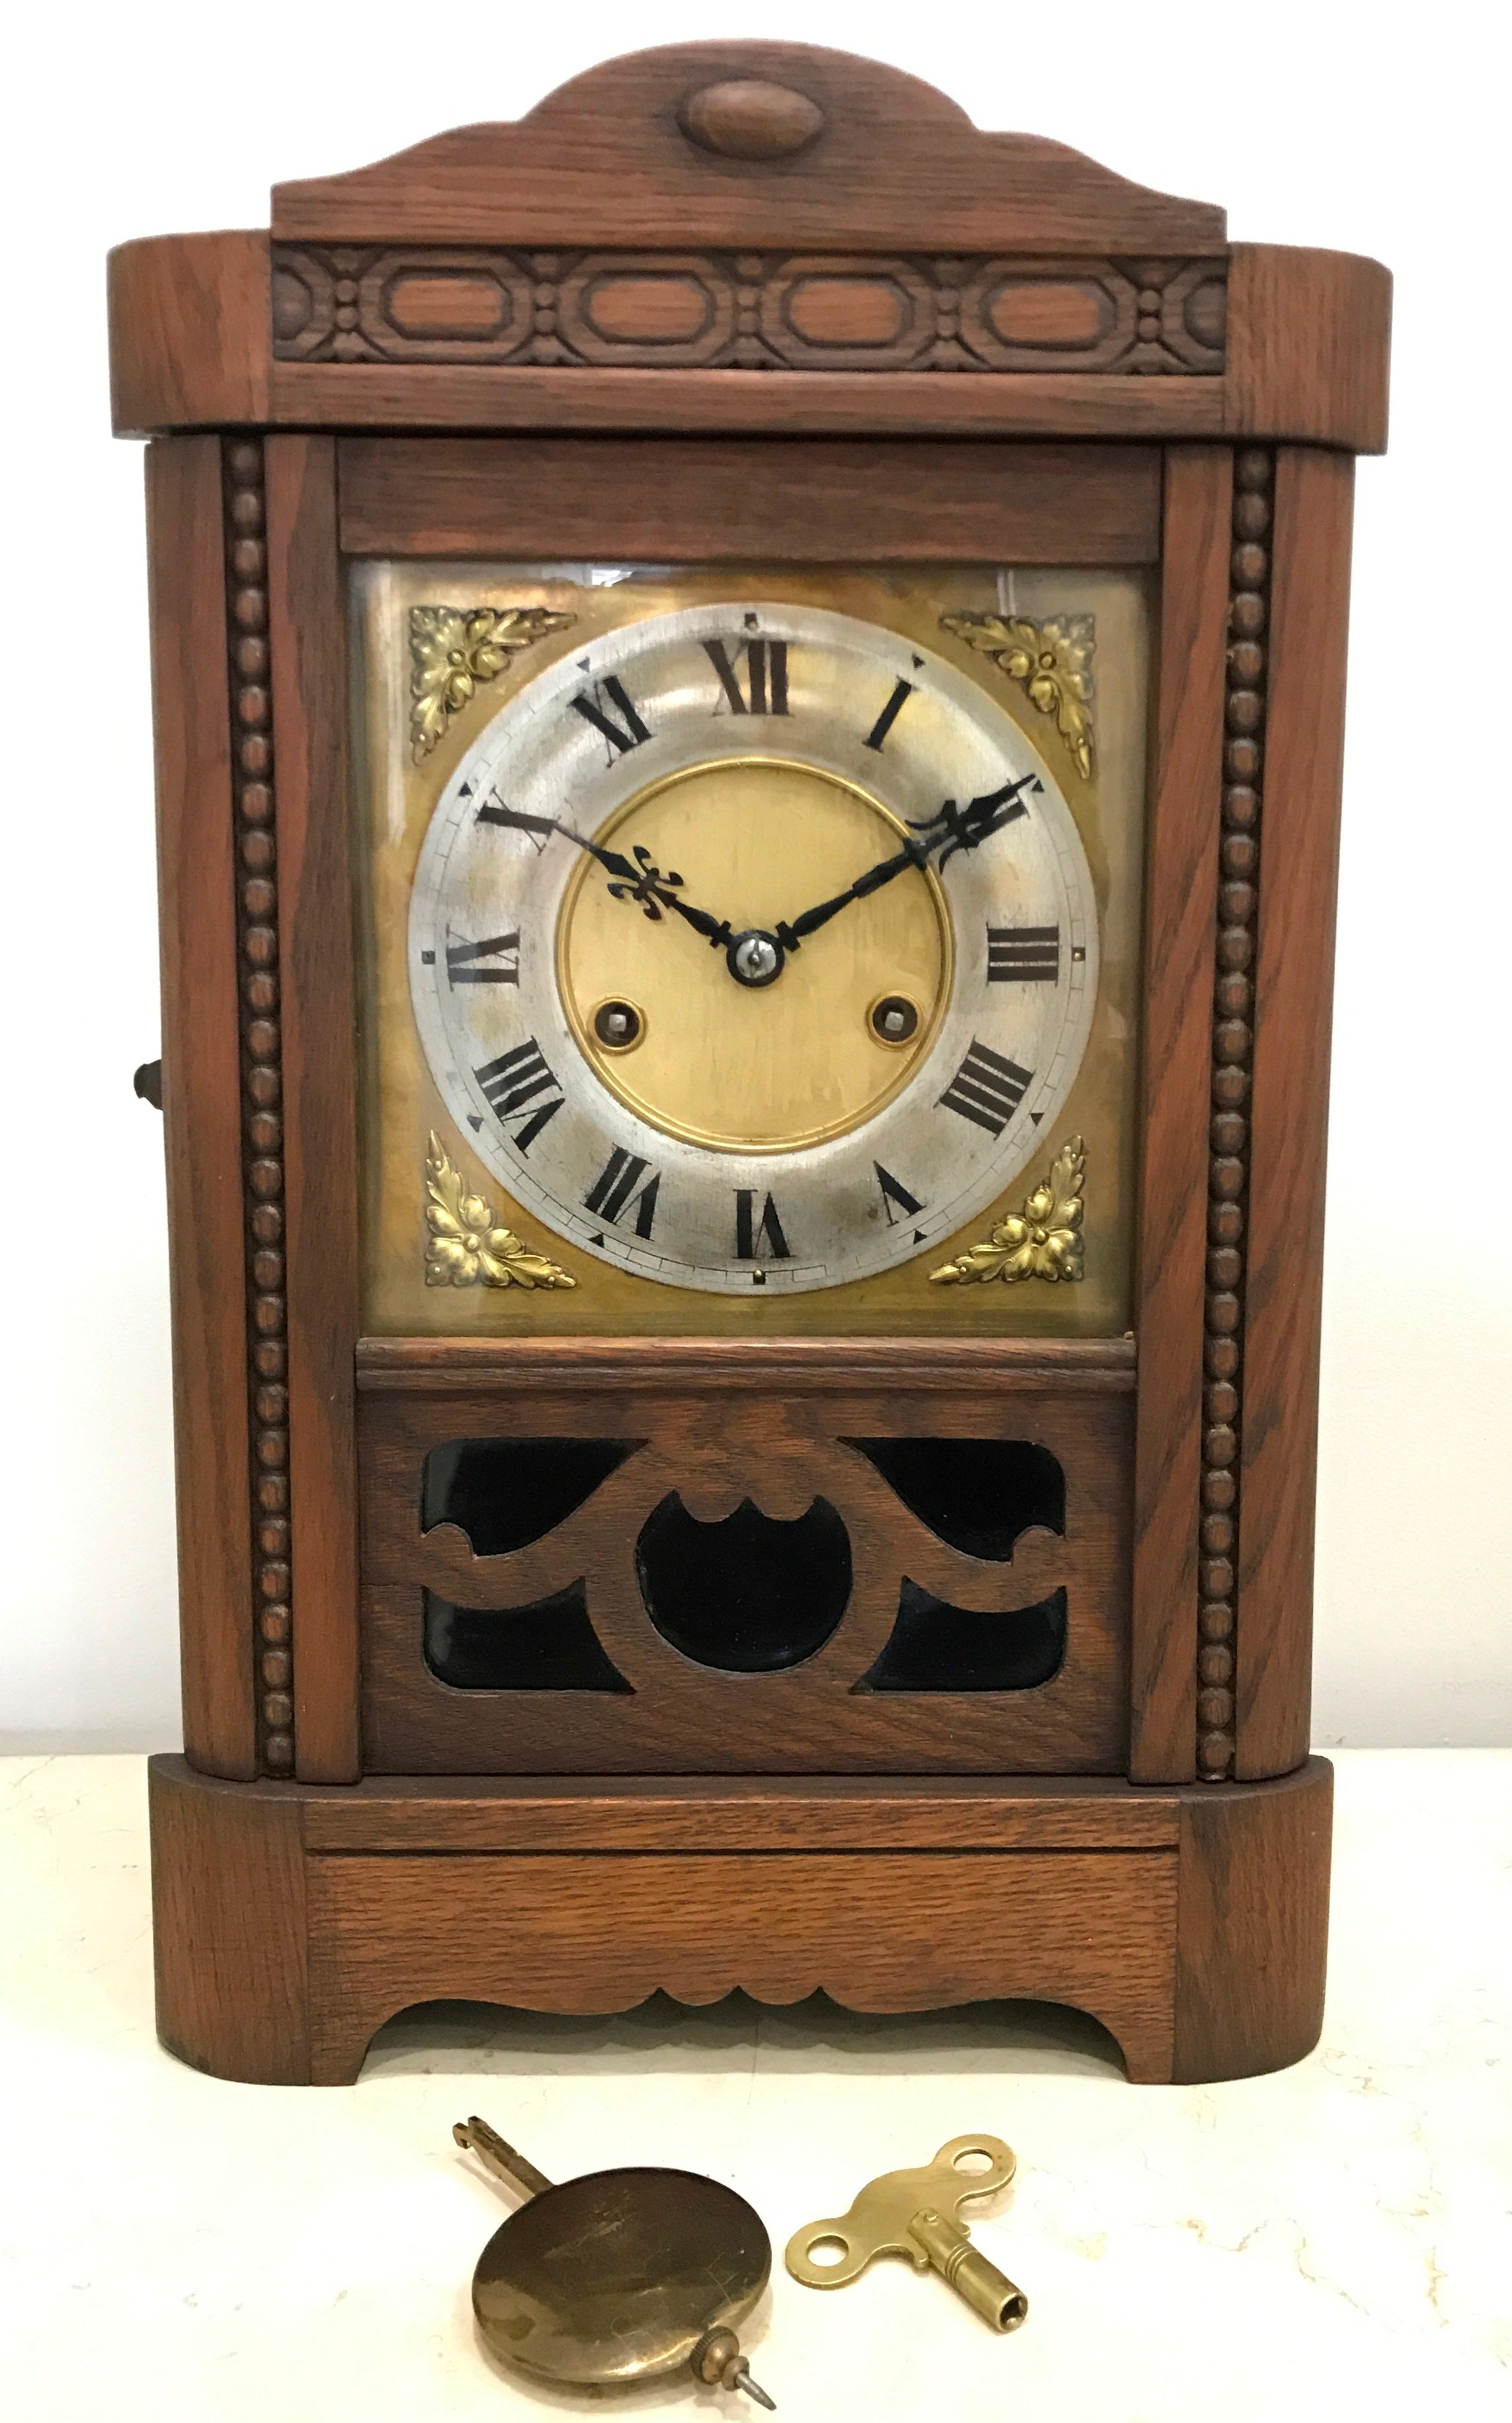 Antique HAC Hammer on Coil Chime Mantel Clock | eXibit collection